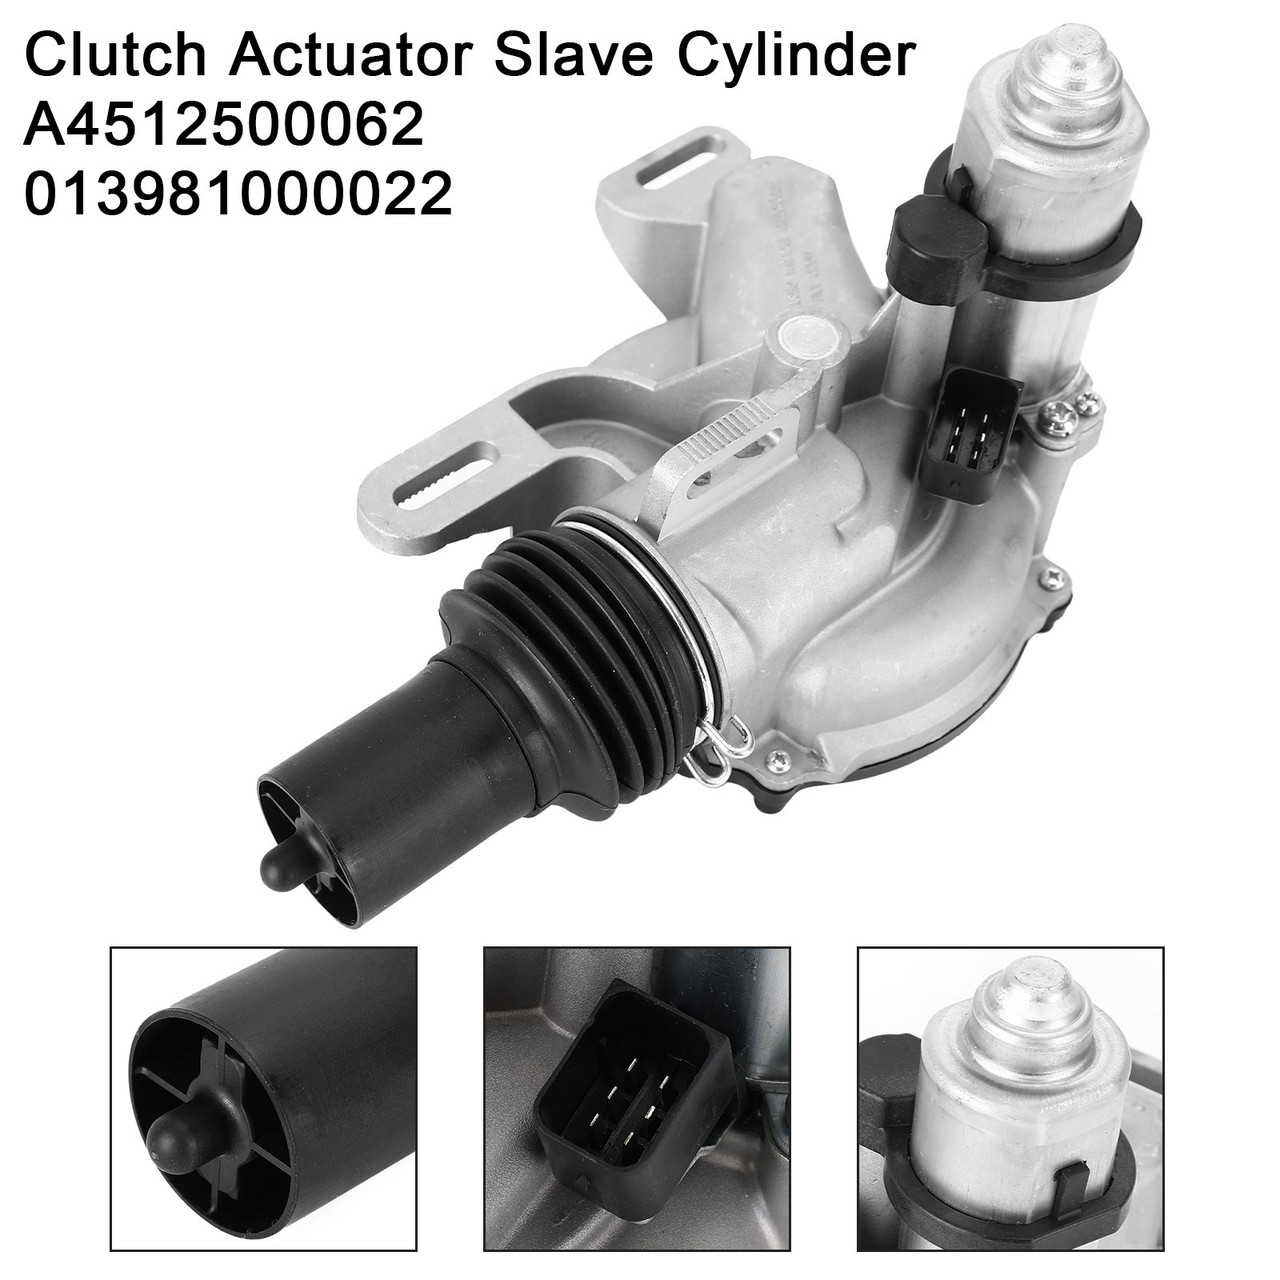 Clutch Actuator Slave Cylinder 4512500062 for Smart Fortwo Coupe Cabrio